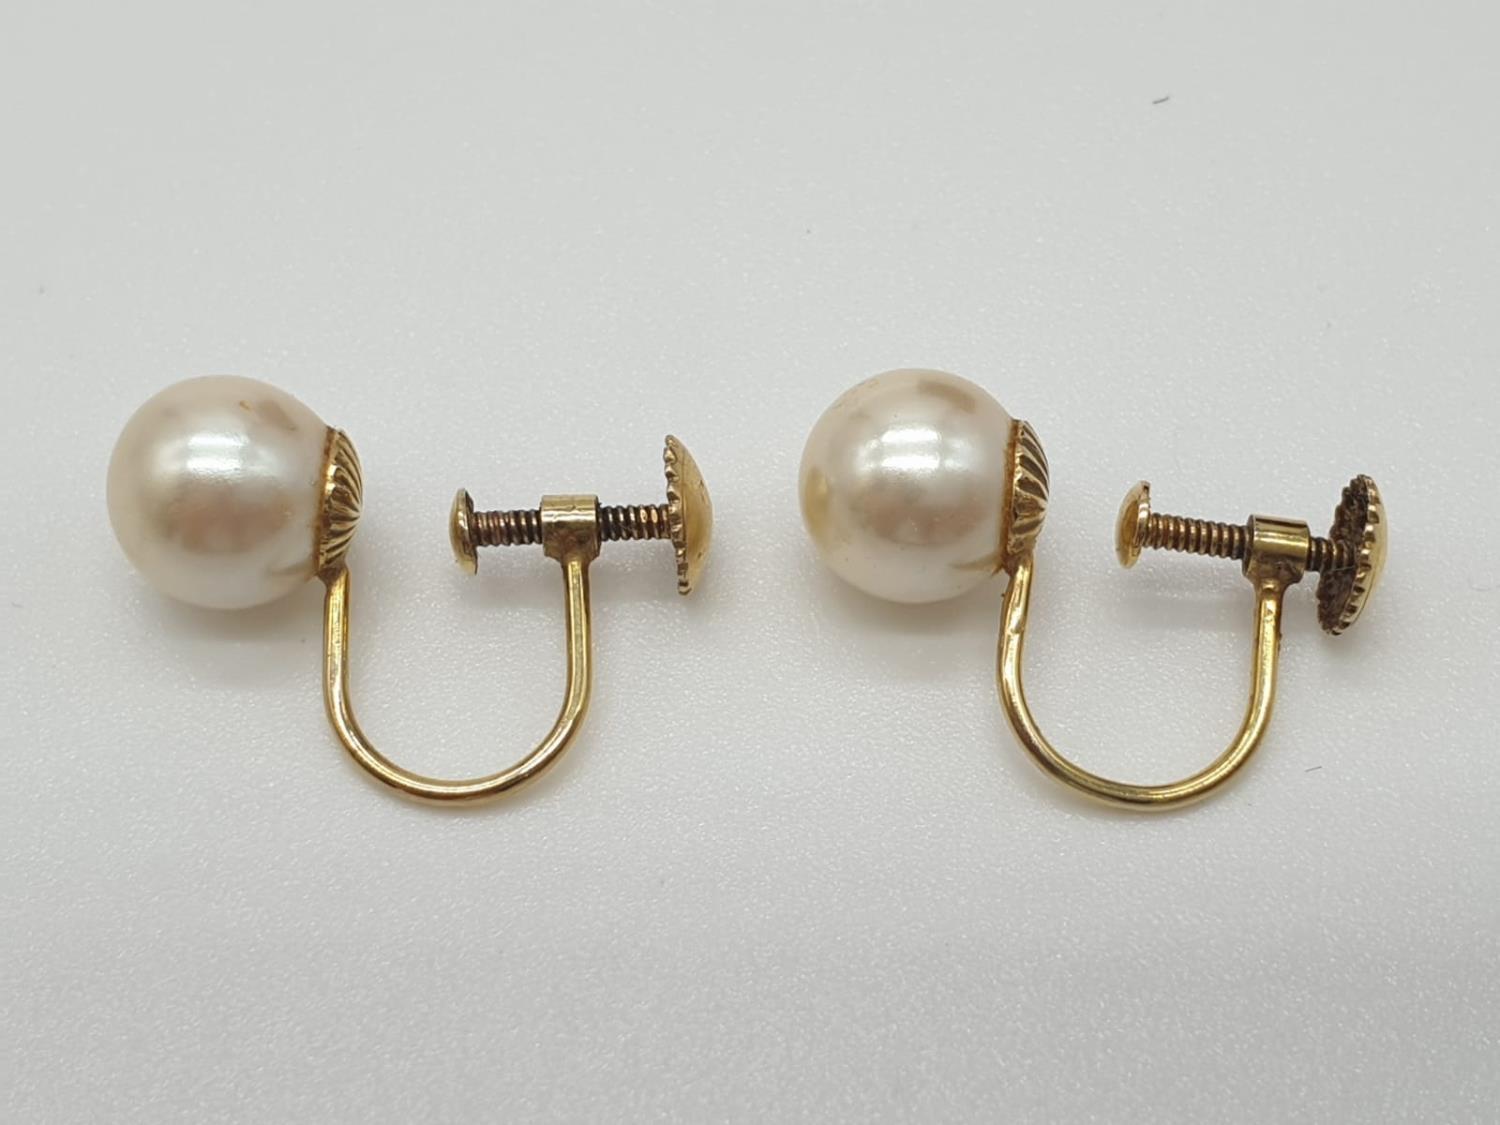 9ct gold vintage pearl earrings, having screw fitting and marked for 9ct, original box and good - Image 2 of 5